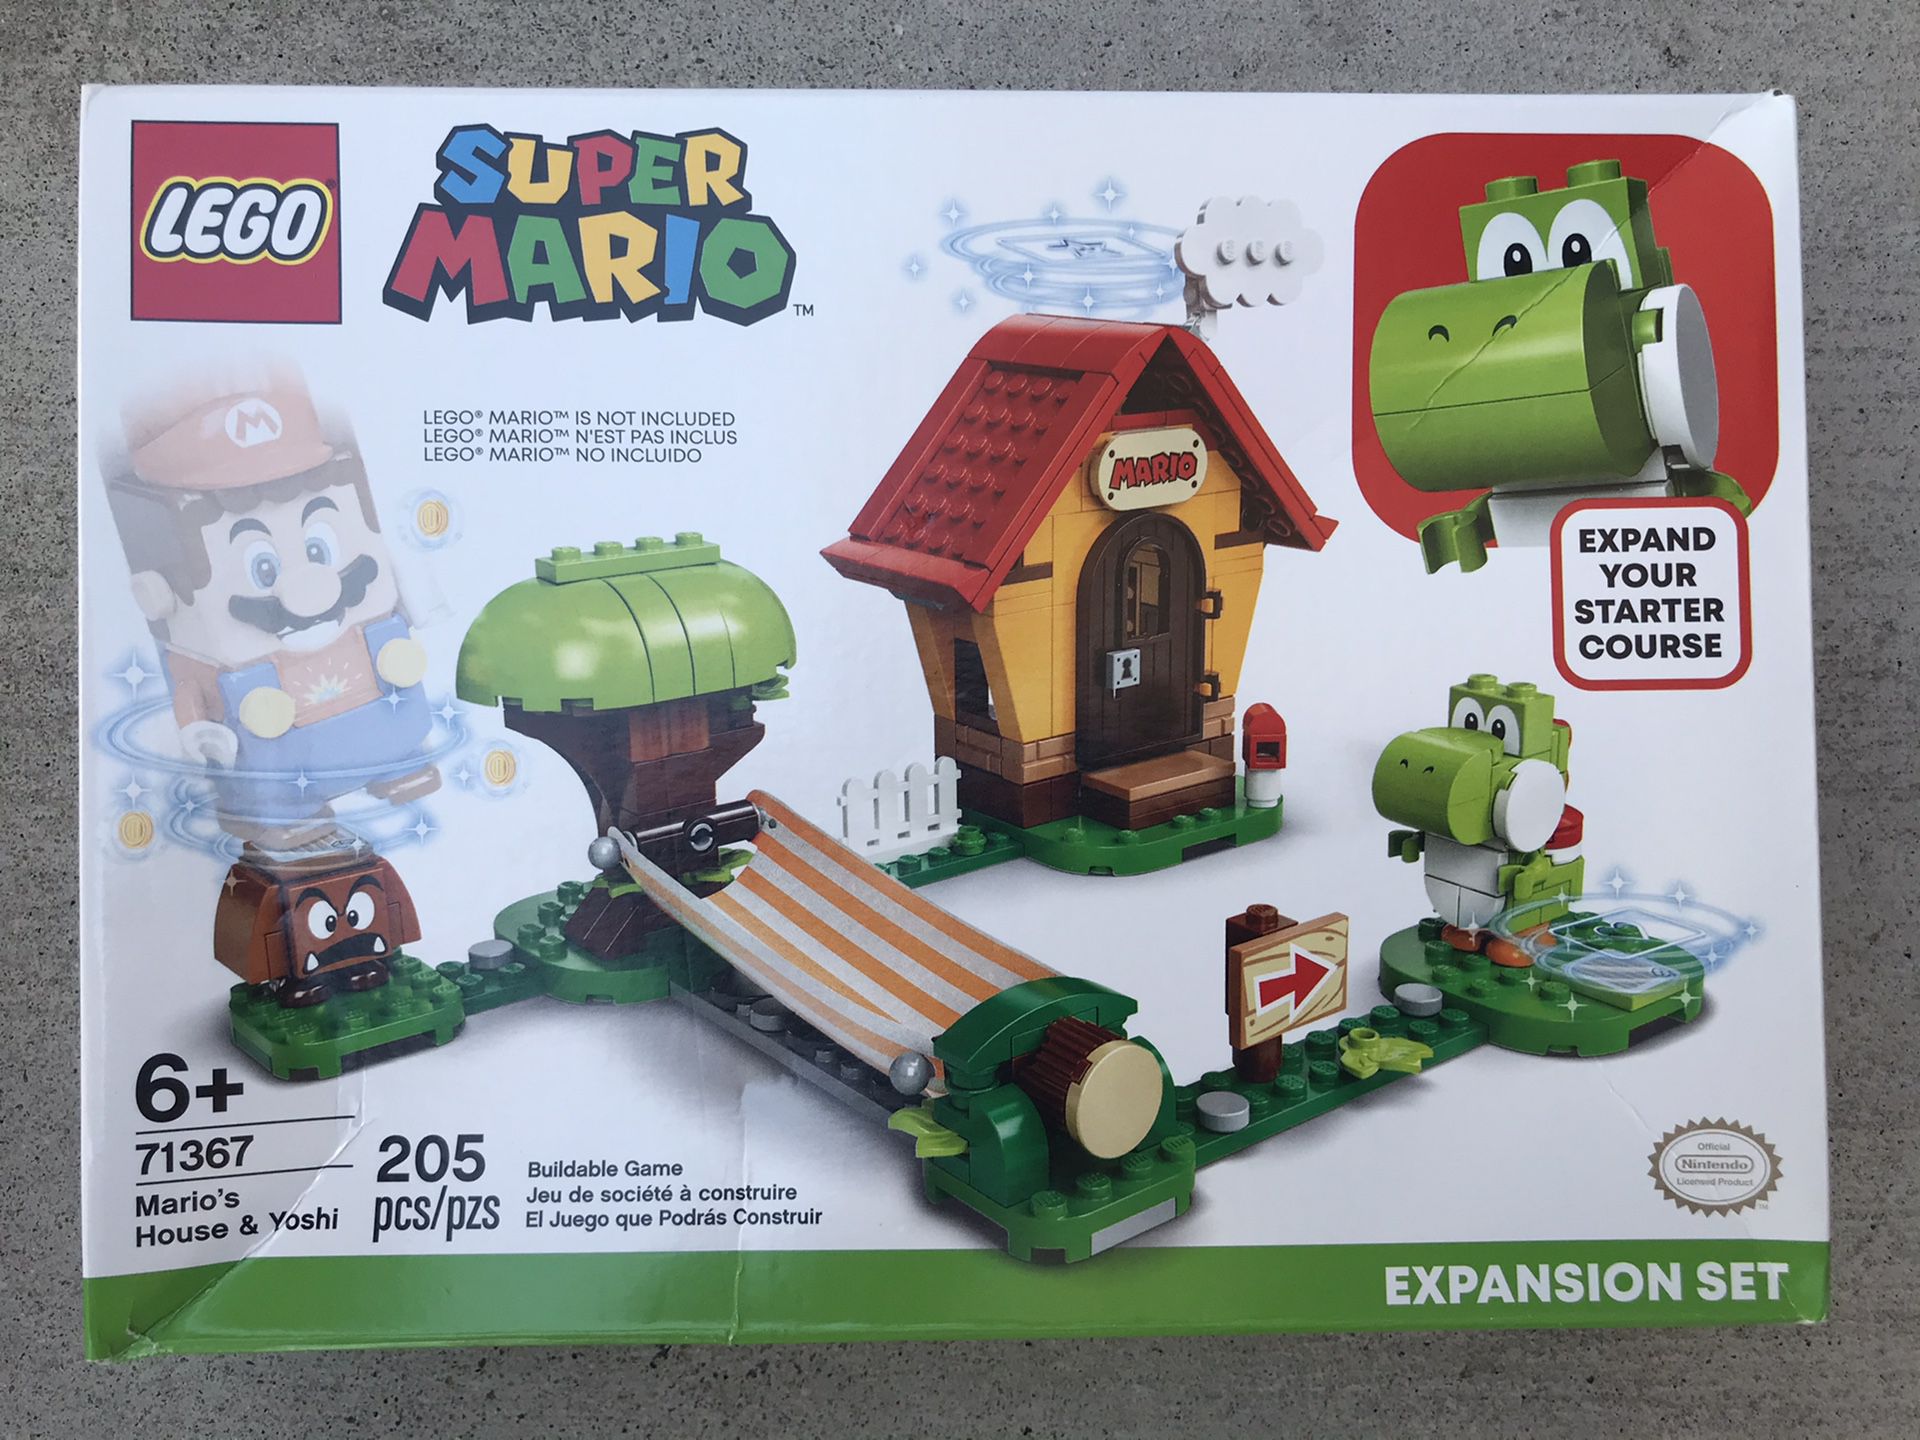 Brand New ! LEGO Super Mario Mario’s House and Yoshi Expansion Set Collectible Toy for Creative Kids ! 71367